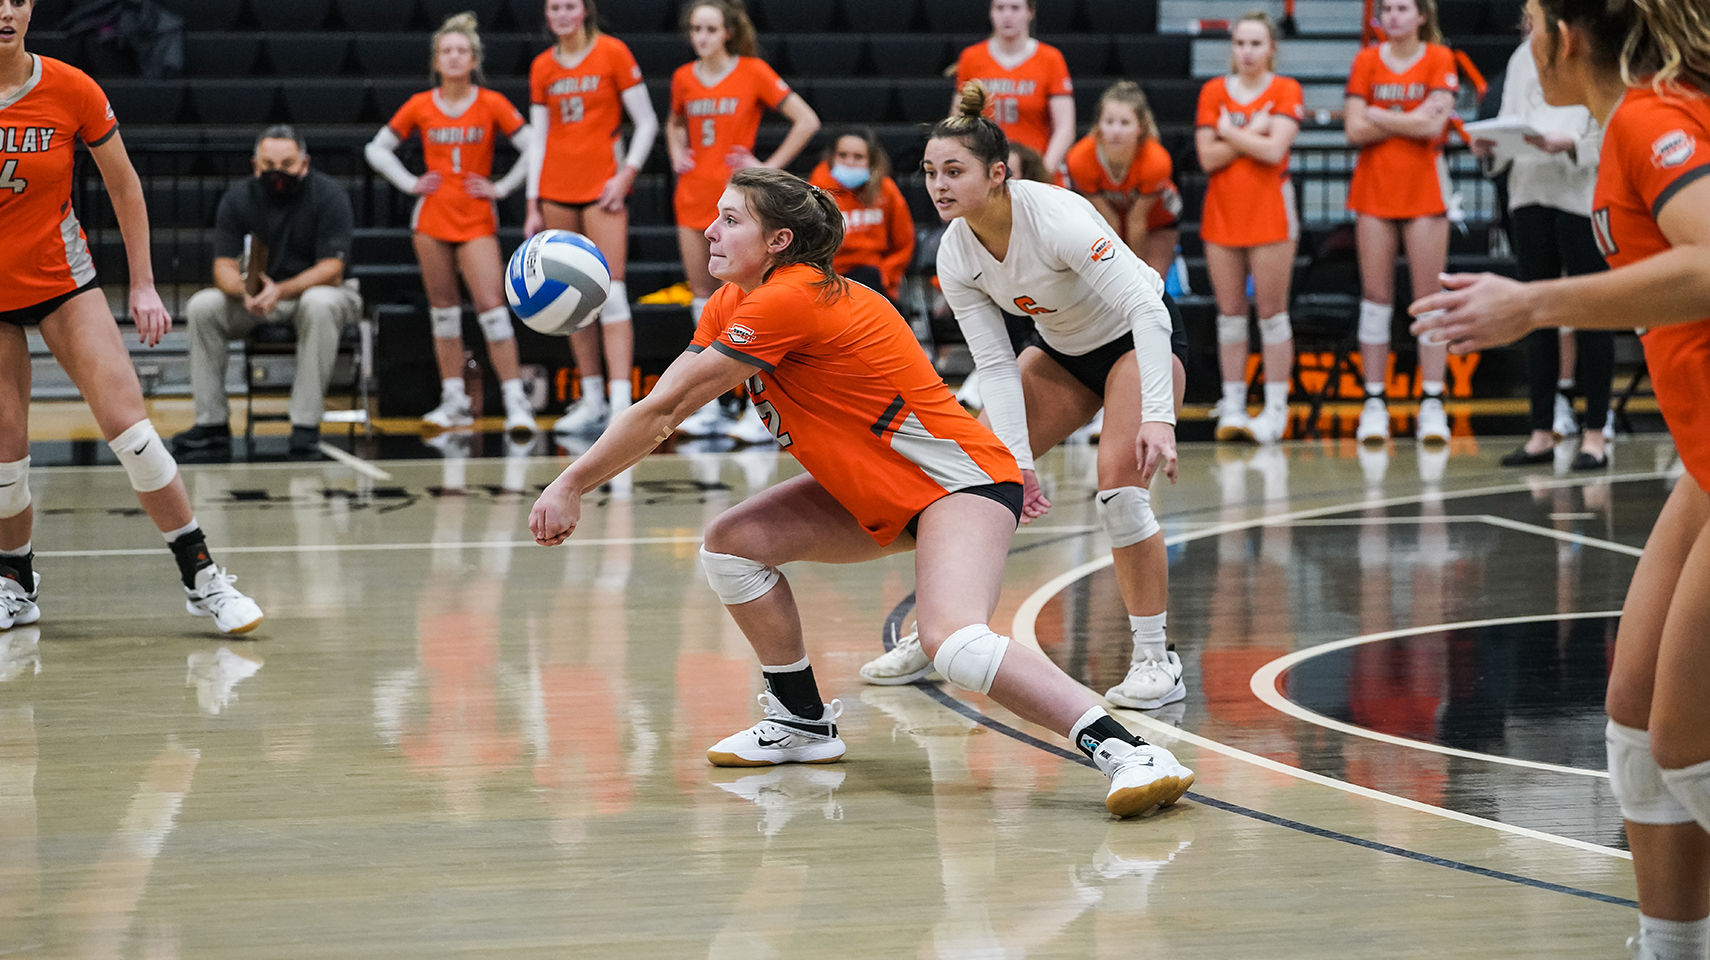 volleyball player in orange scraping the floor while digging the ball